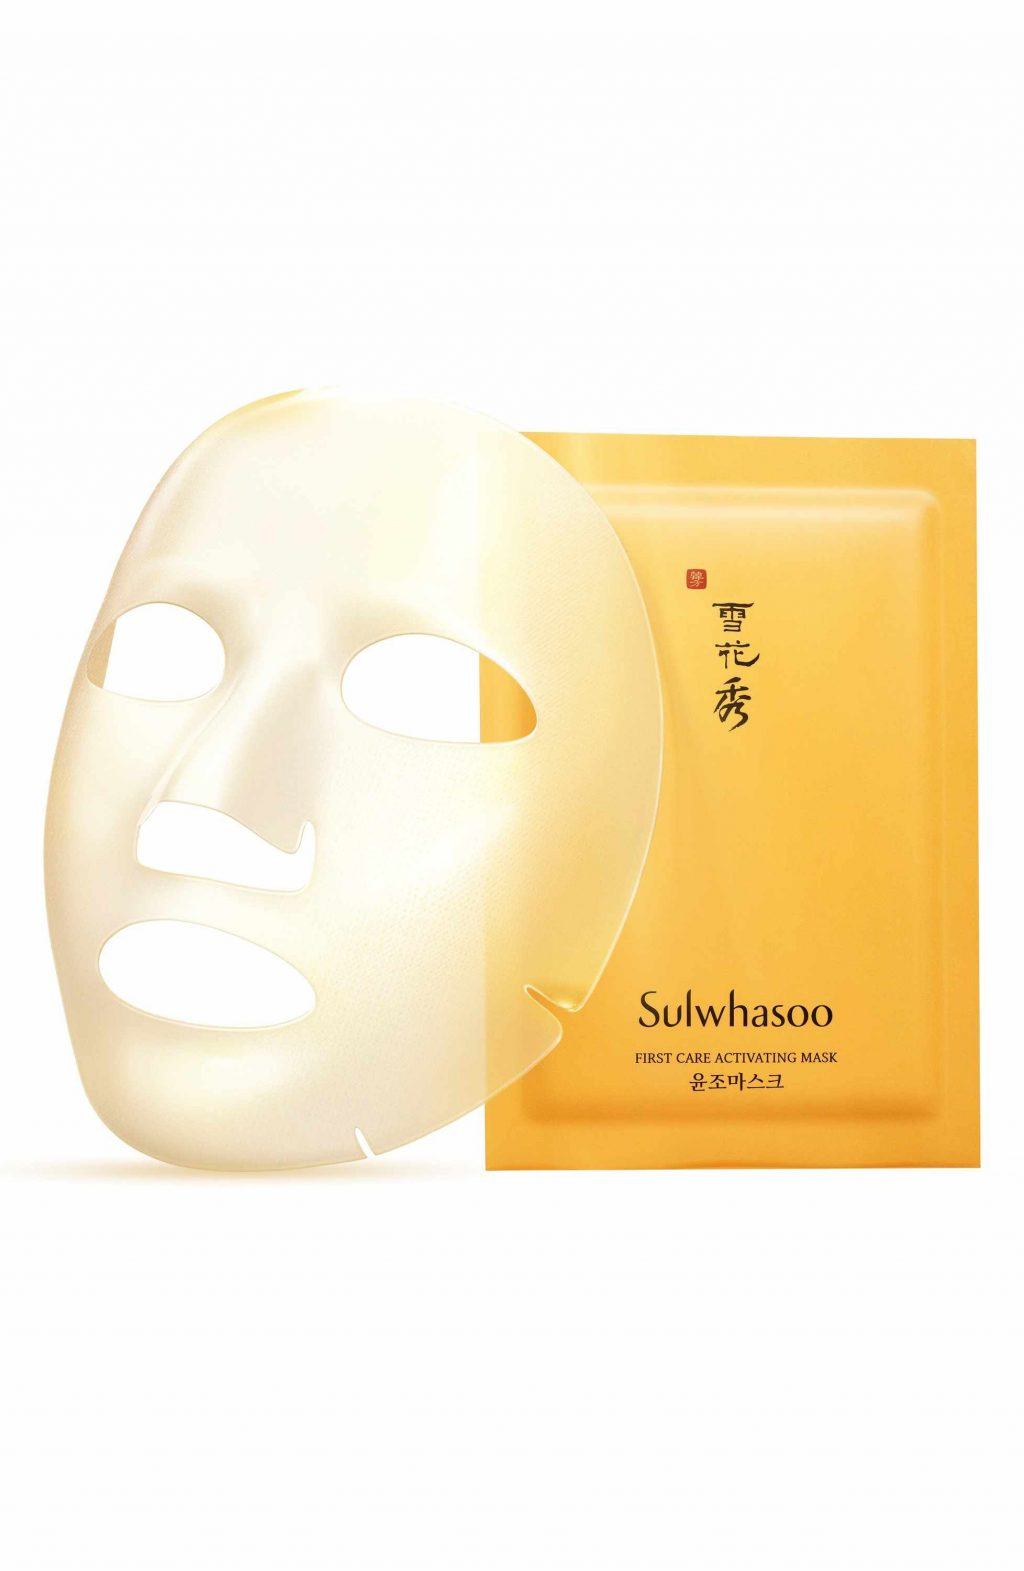 mặt nạ dưỡng da Sulwhasoo First Care Activating Sheet Mask